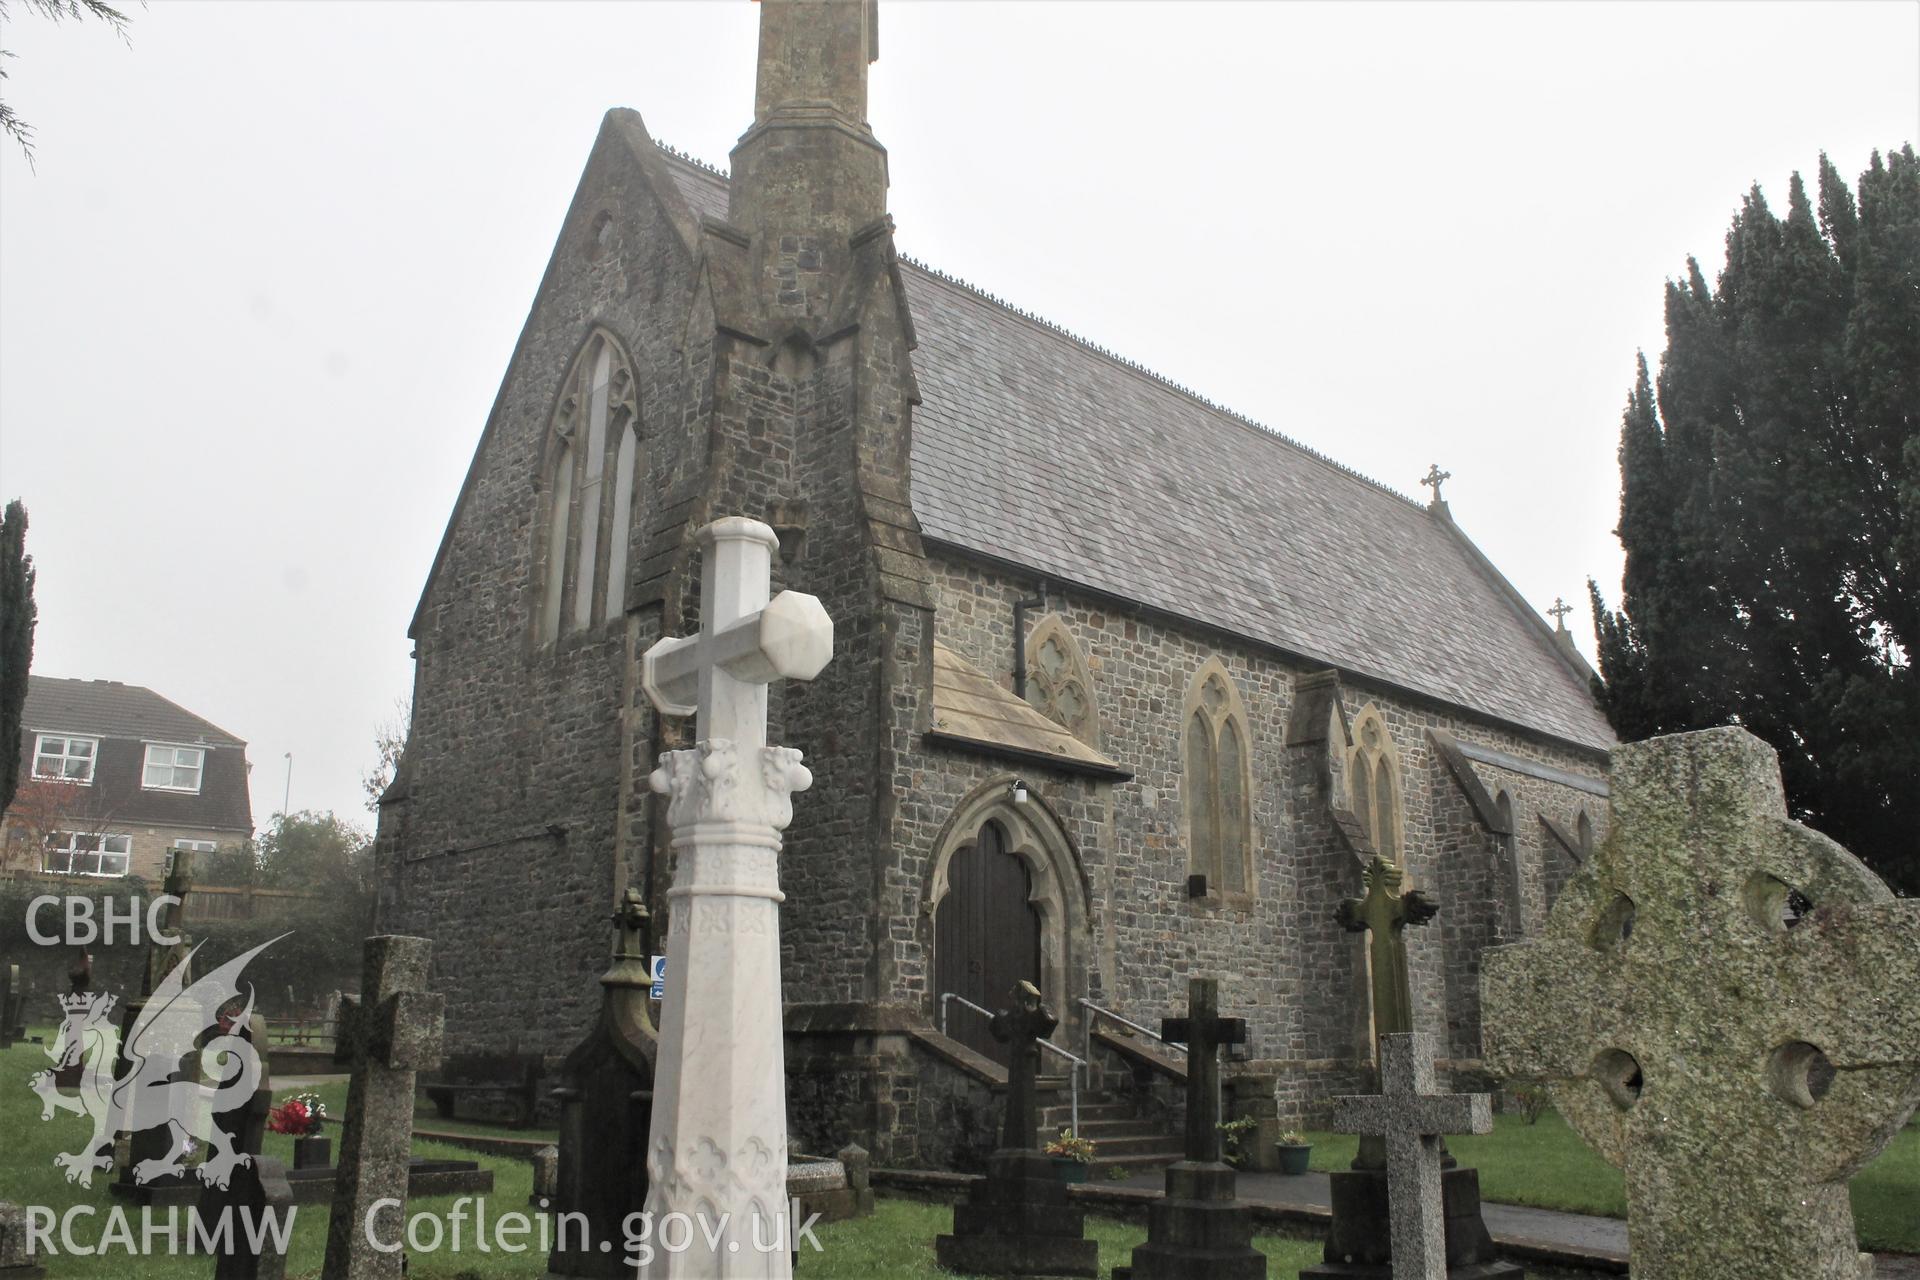 Digital colour photograph showing exterior of St Mary's Catholic church, Carmarthen.